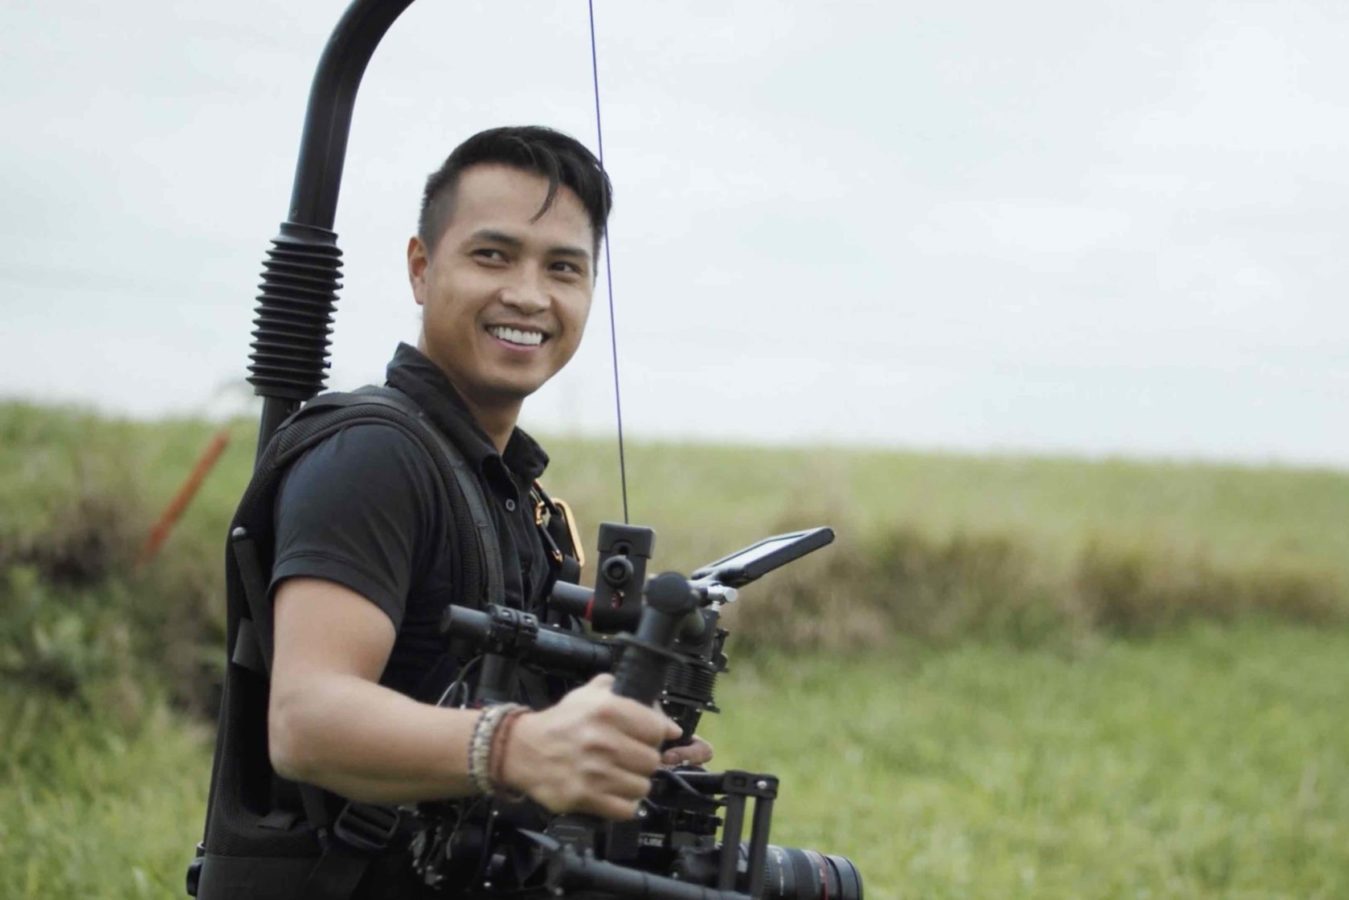 Production Resources Hire Crew Tom Van side profile using video equipment in a field smiling for the camera